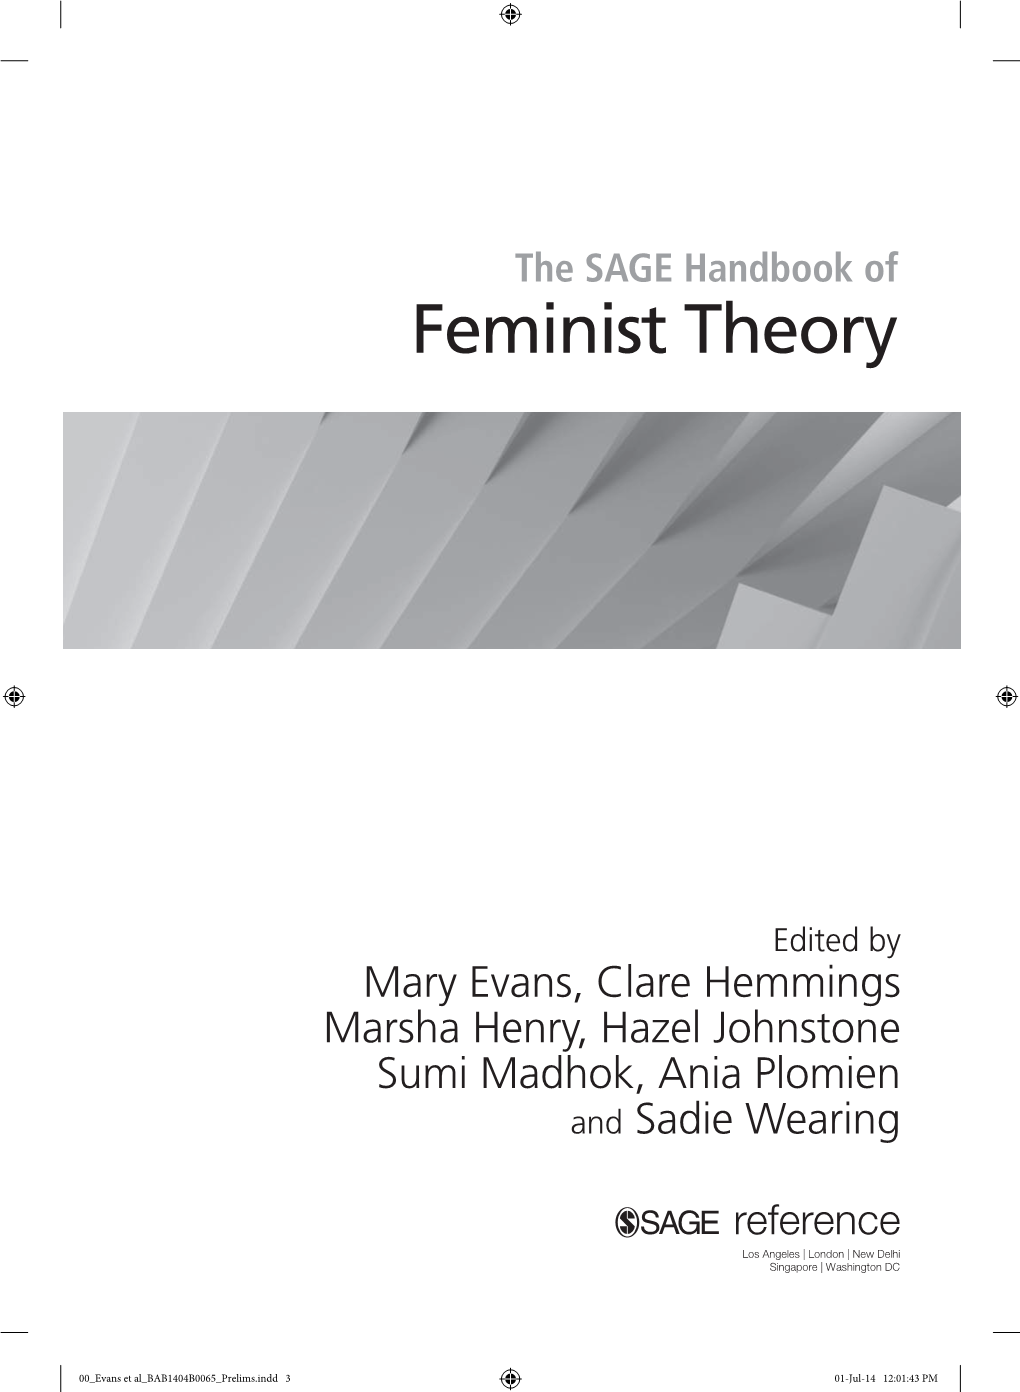 Thinking Sex Materially: Marxist, Socialist, and Related Feminist Approaches